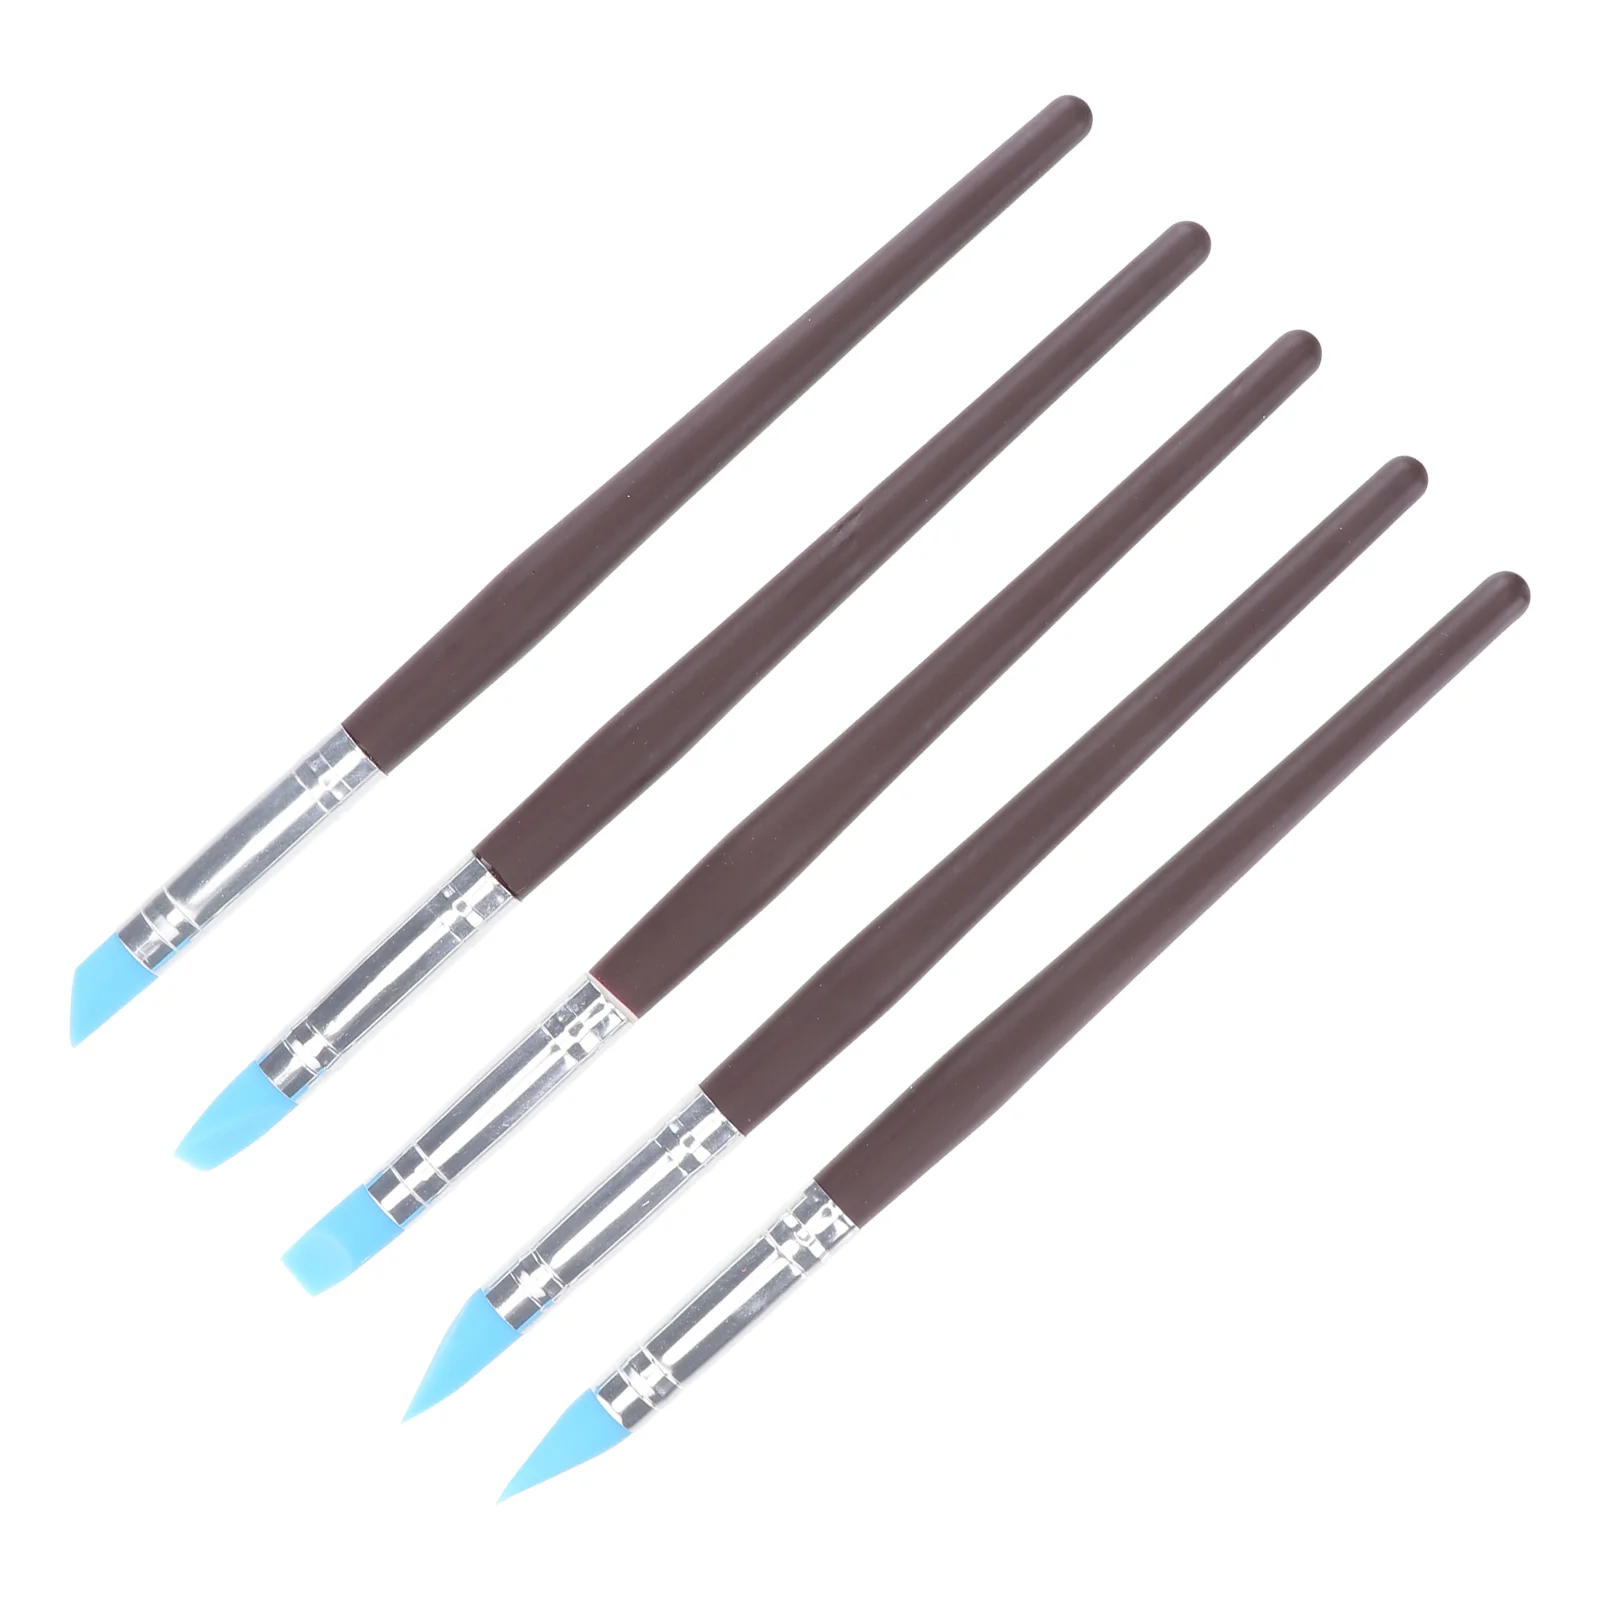 

5pcs Clay Sculpting Tool Rubber Tip Clay Shaping Carving Brushes Wipe Out Tools Silicone Pottery Clay Pen Modeling Brushes for